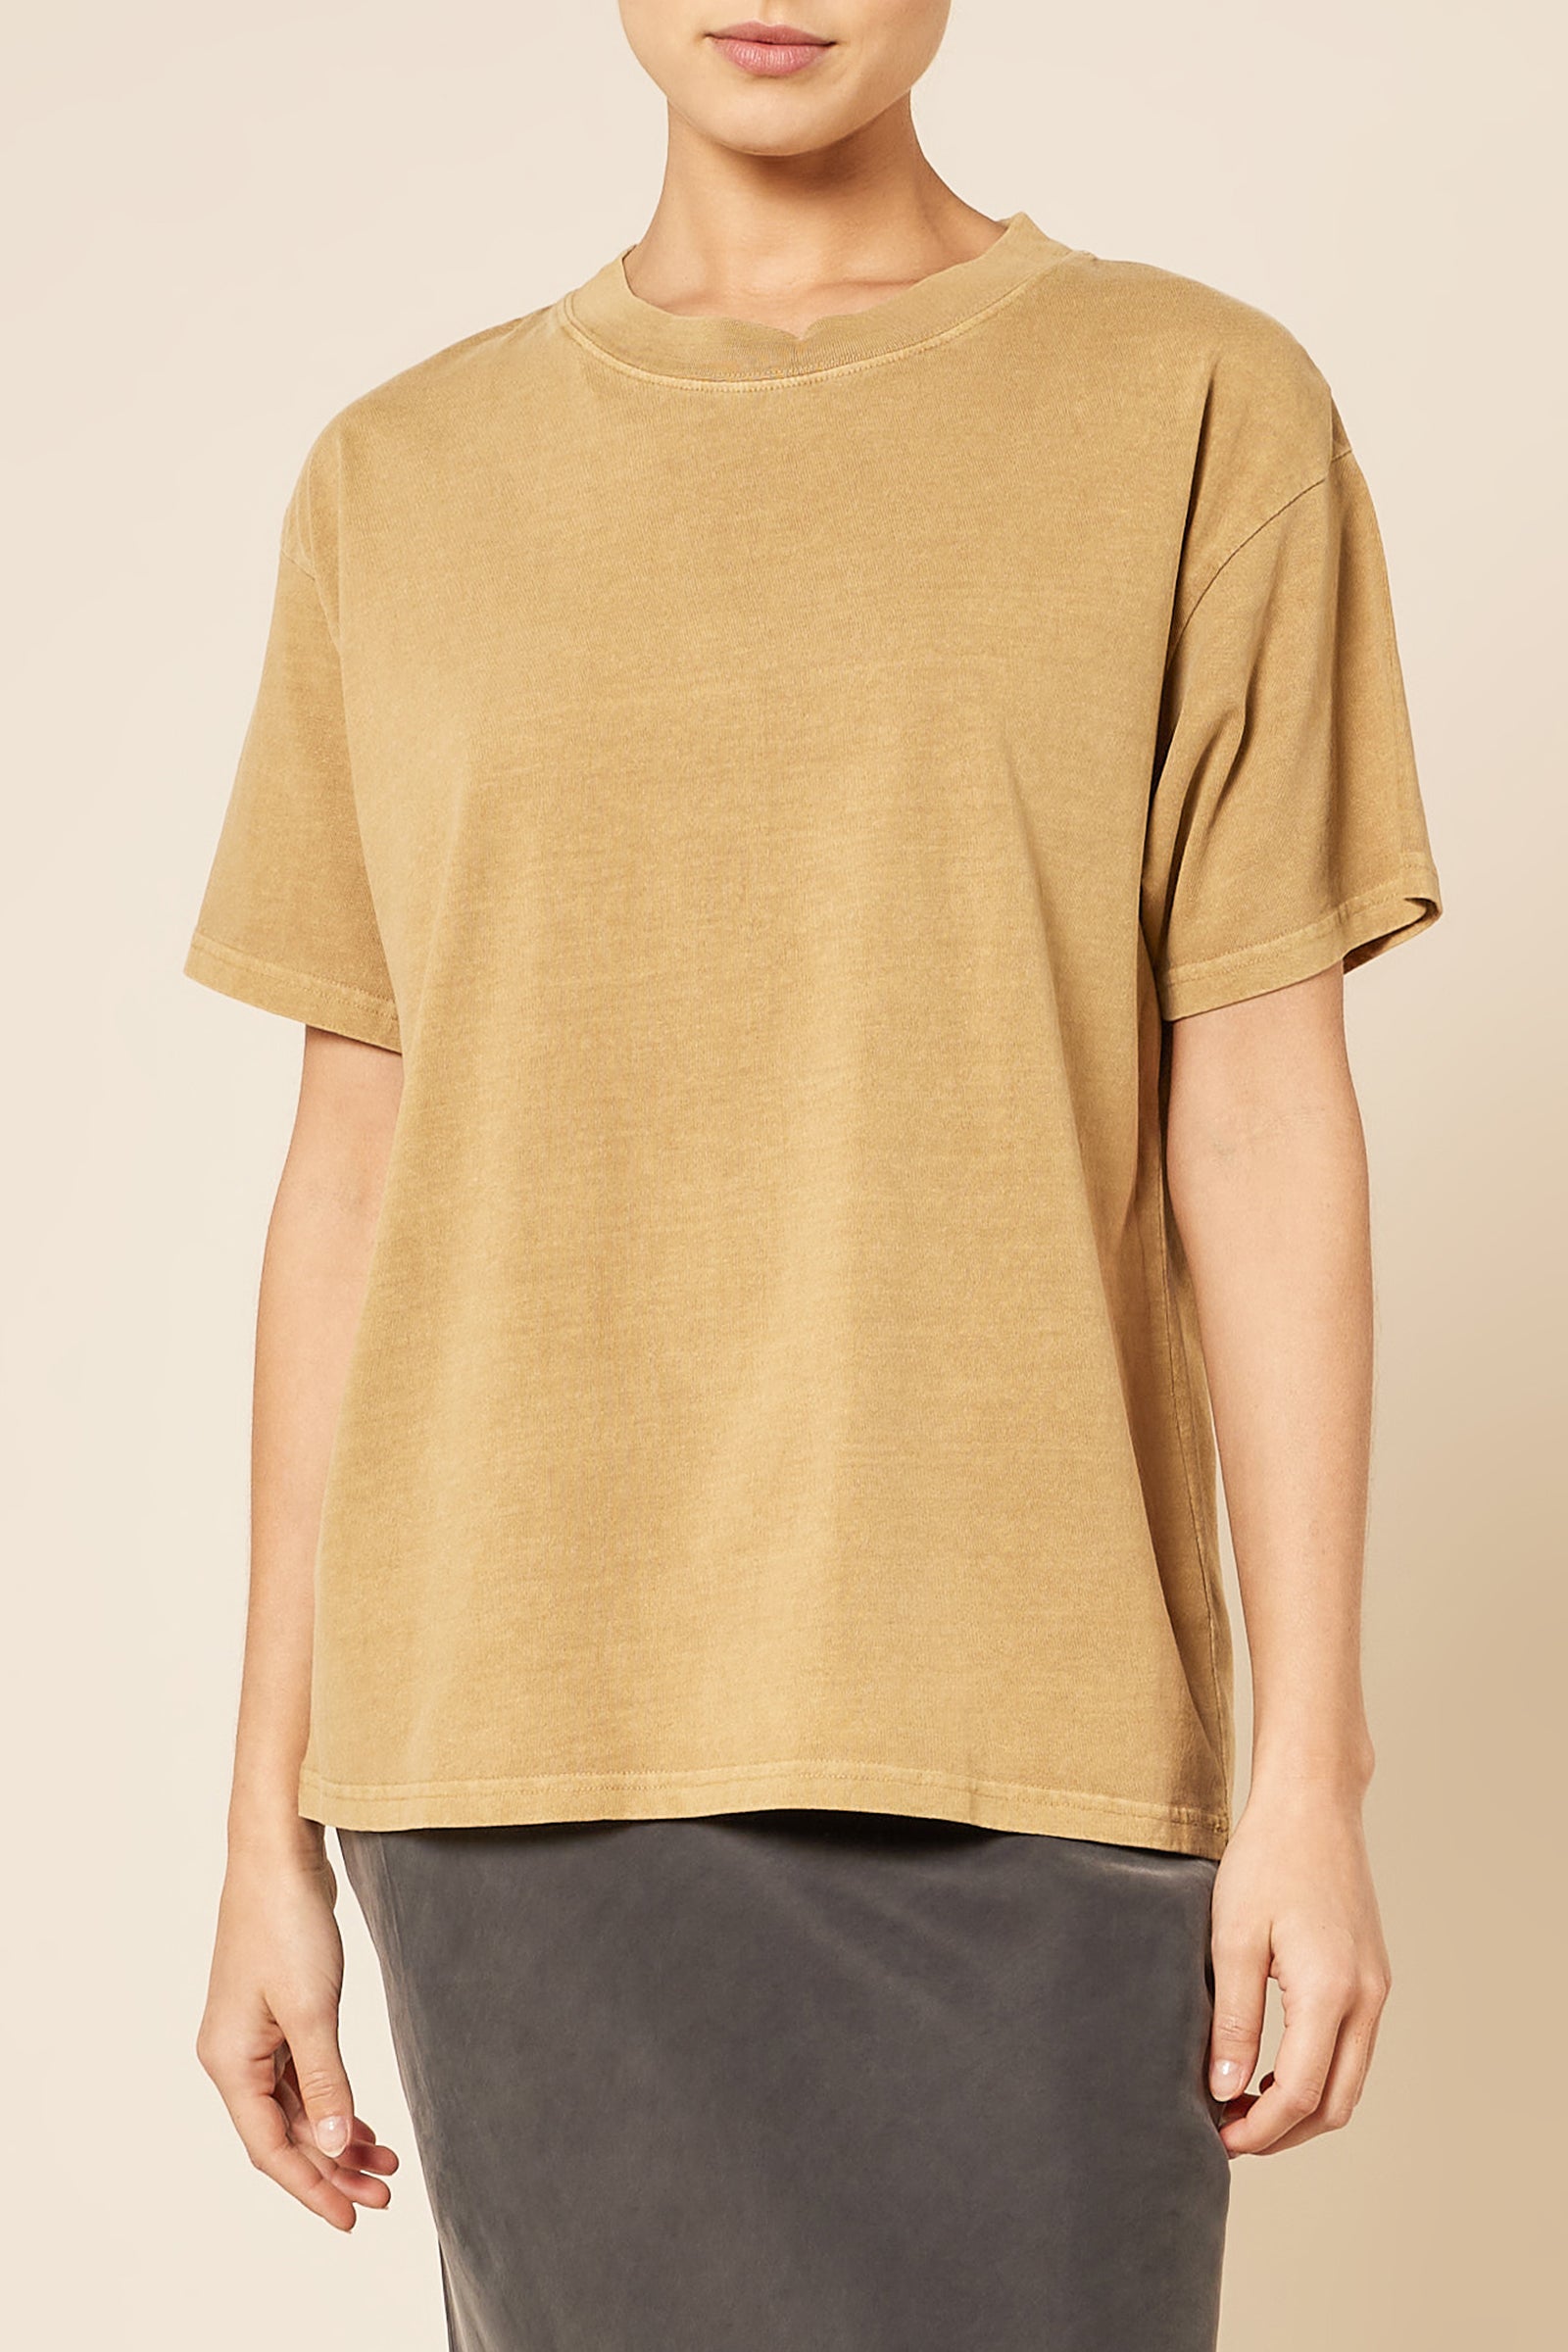 Nude Lucy Frankie Organic Washed Bf Tee In a Brown Oak Colour